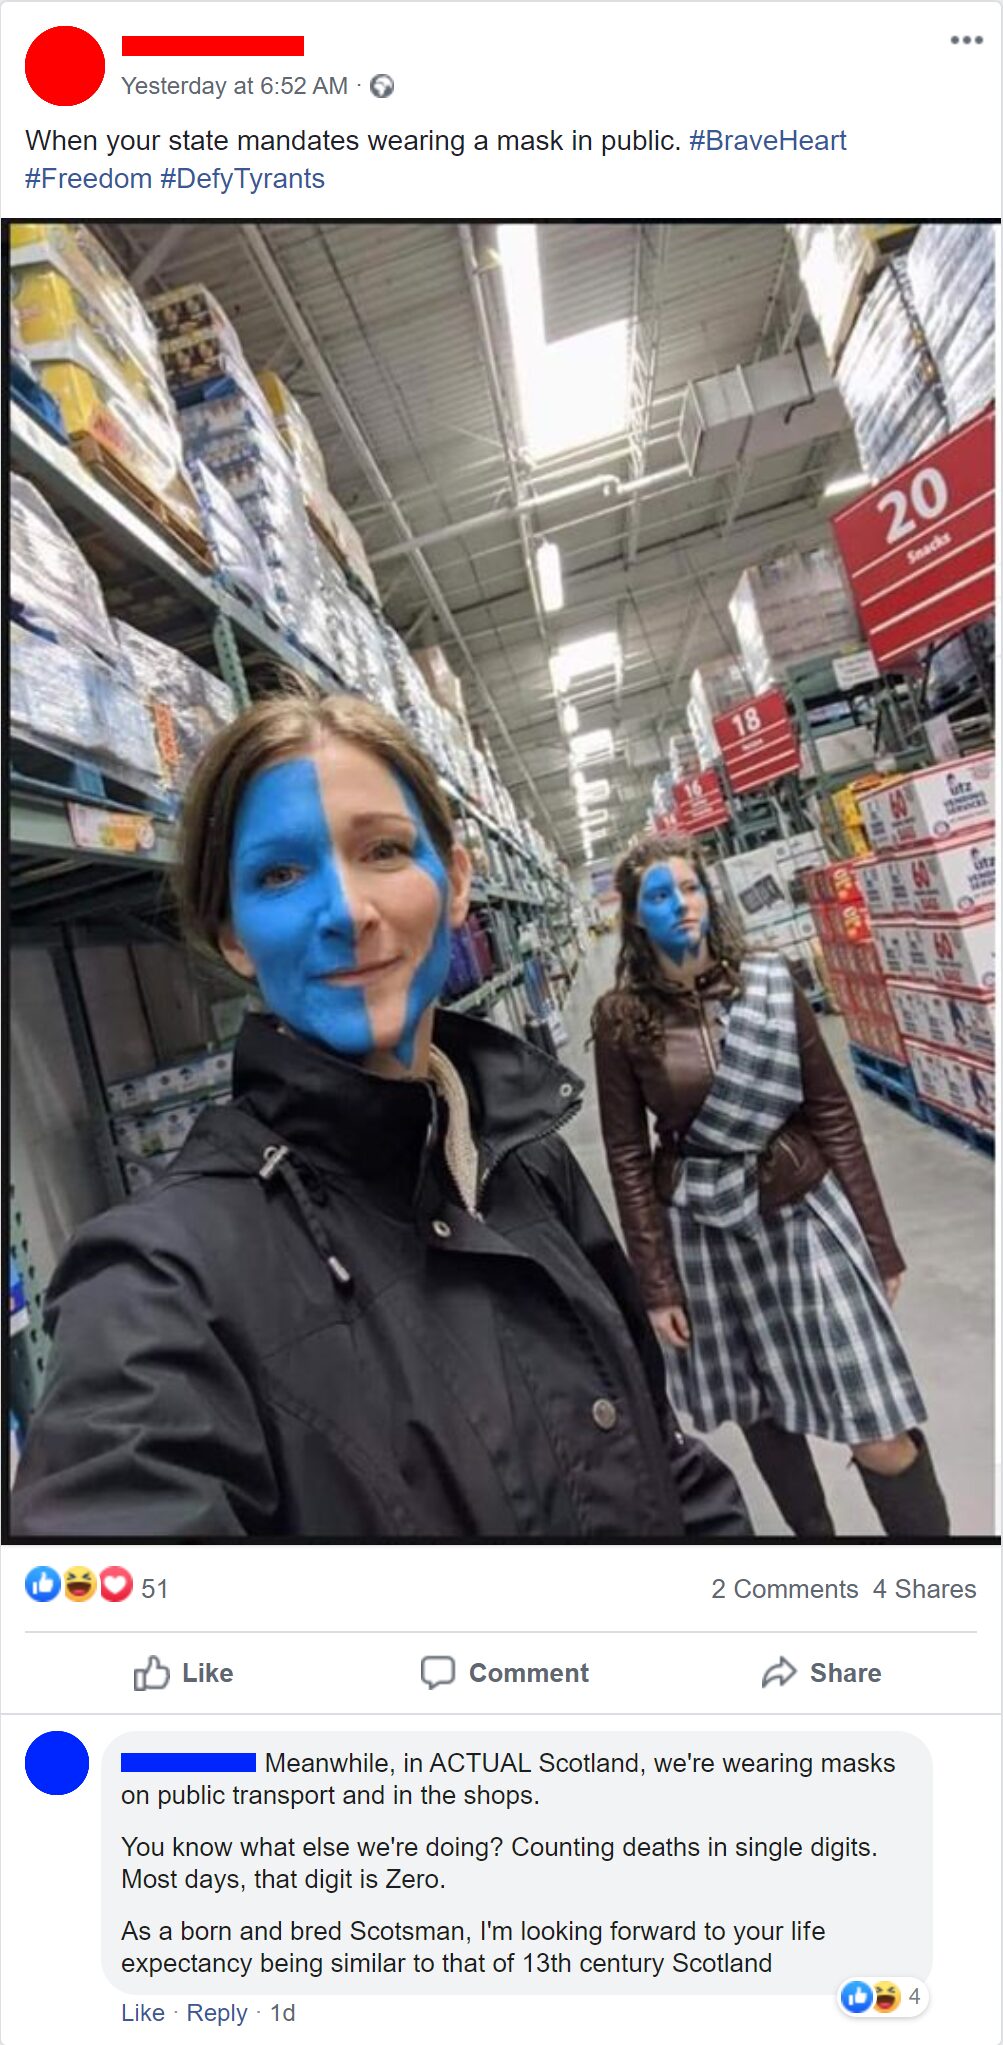 funny comments - When your state mandates wearing a mask in public. - Meanwhile, in Actual Scotland, we're wearing masks on public transport and in the shops. You know what else we're doing? Countin